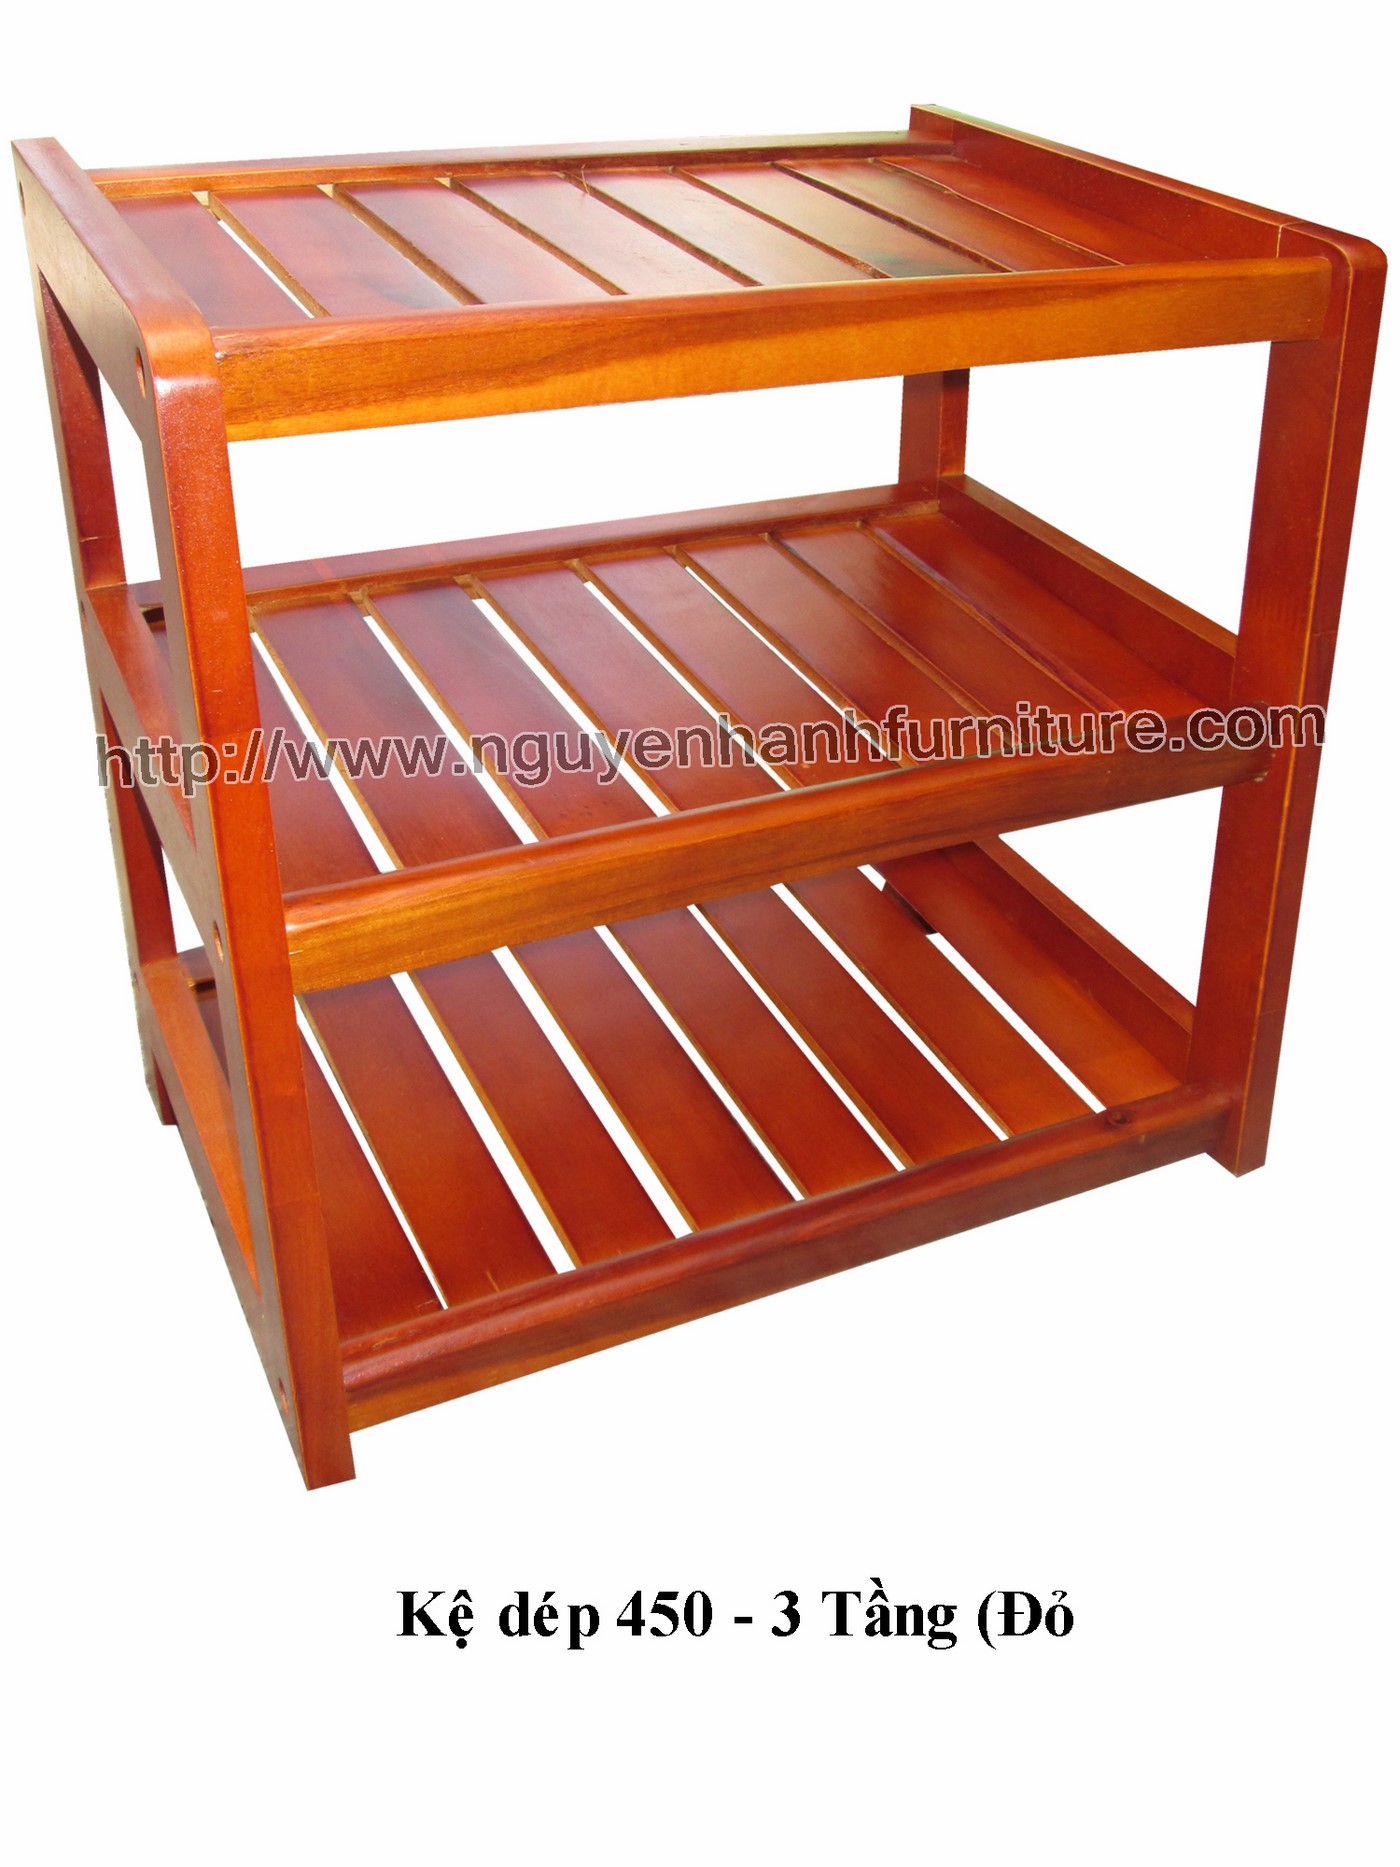 Name product: Shoeshelf 3 Floors 45 with sparse blades (Red) - Dimensions: 45 x 30 x 45 (H) -Description: Wood natural rubber